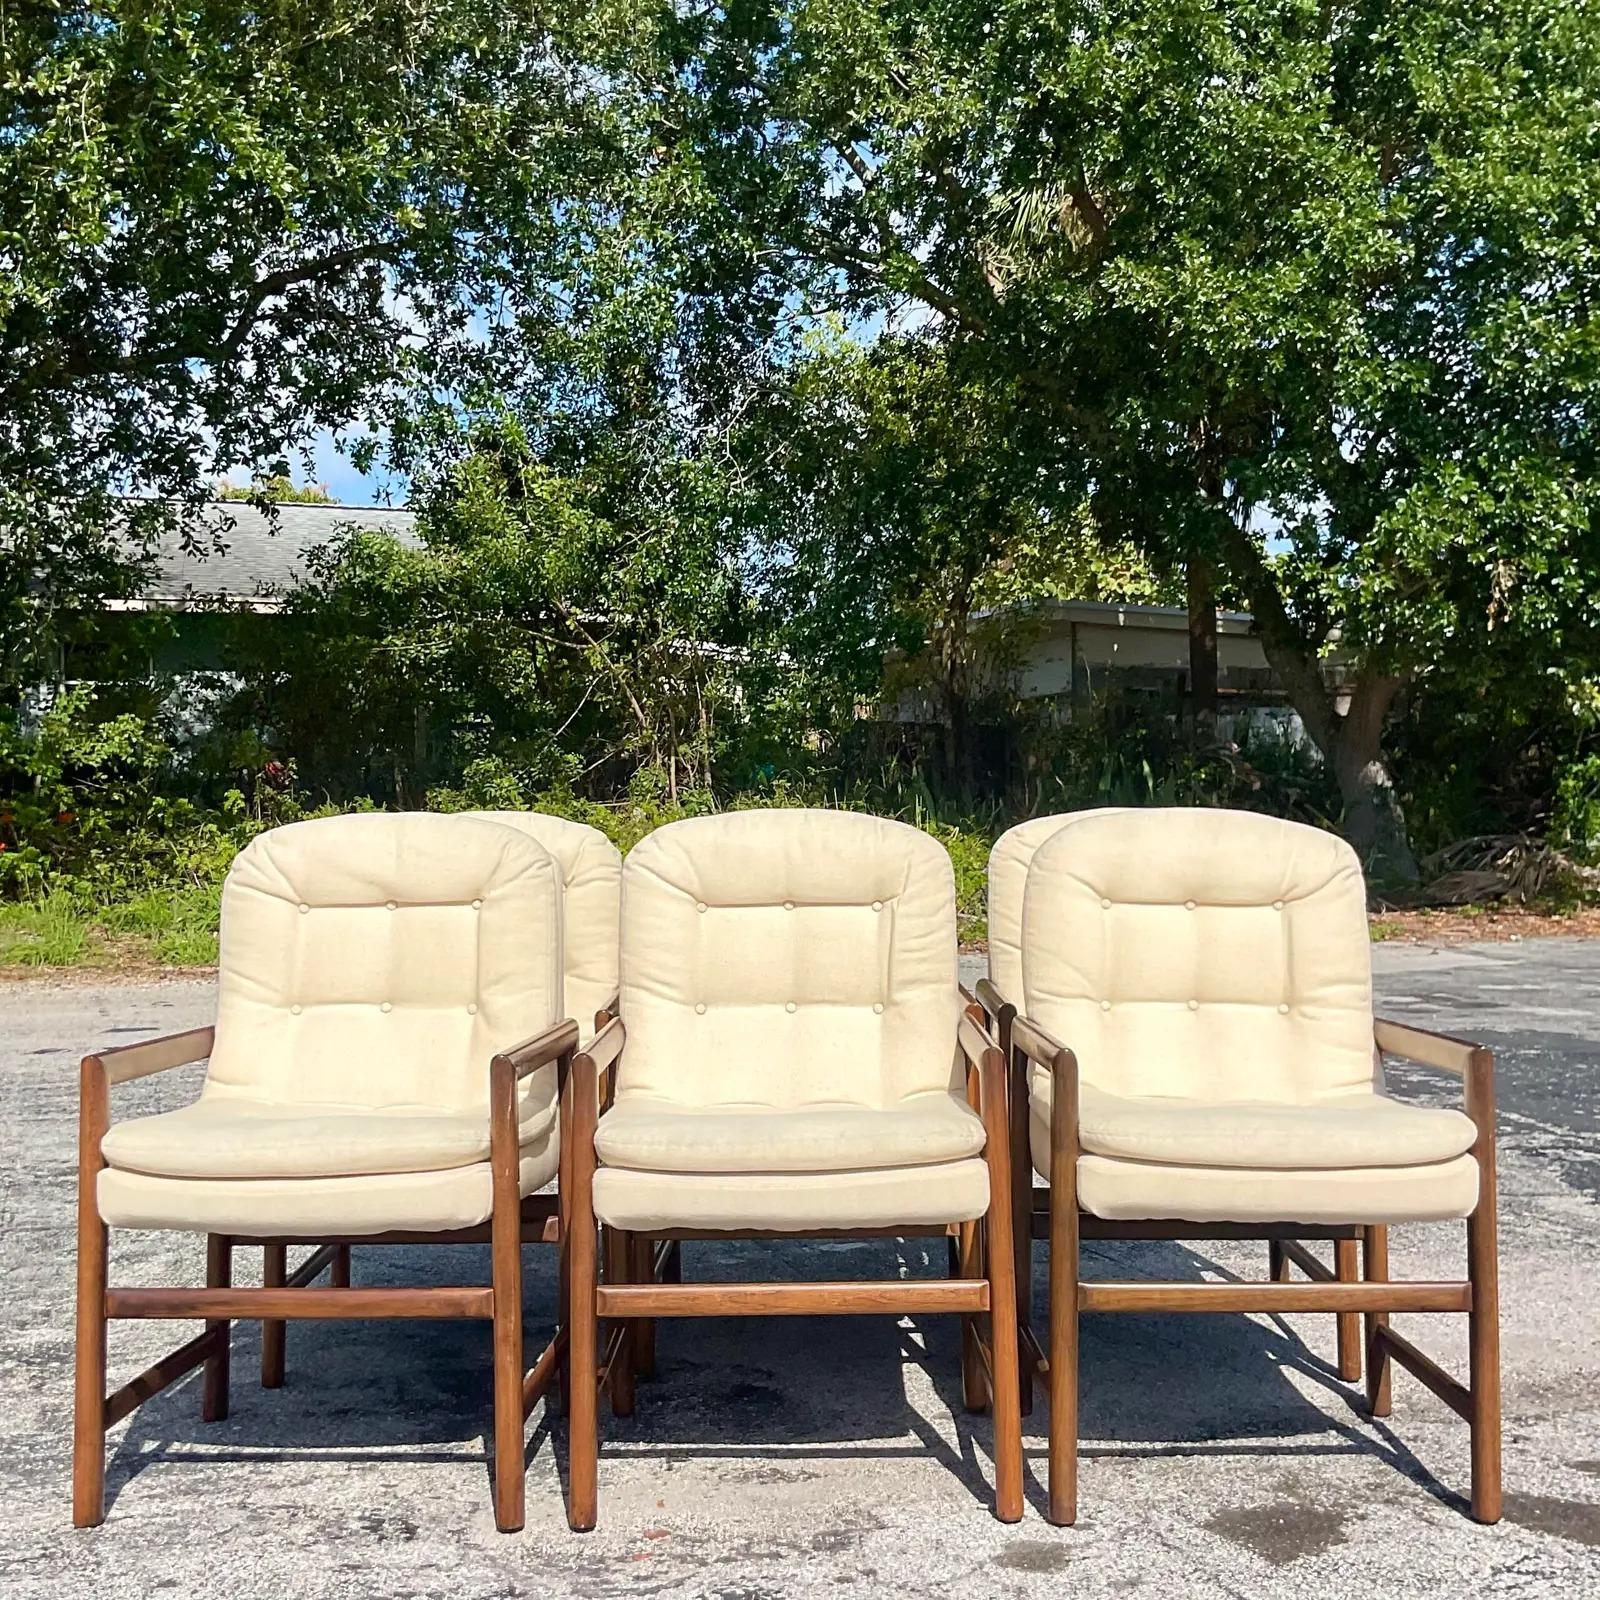 An incredible set of six vintage MCM dining chairs. A chic wooden frame with beautiful wood grain detail. A recently upholstered sling seat with channel tufted detail. Acquired from a Palm Beach estate.